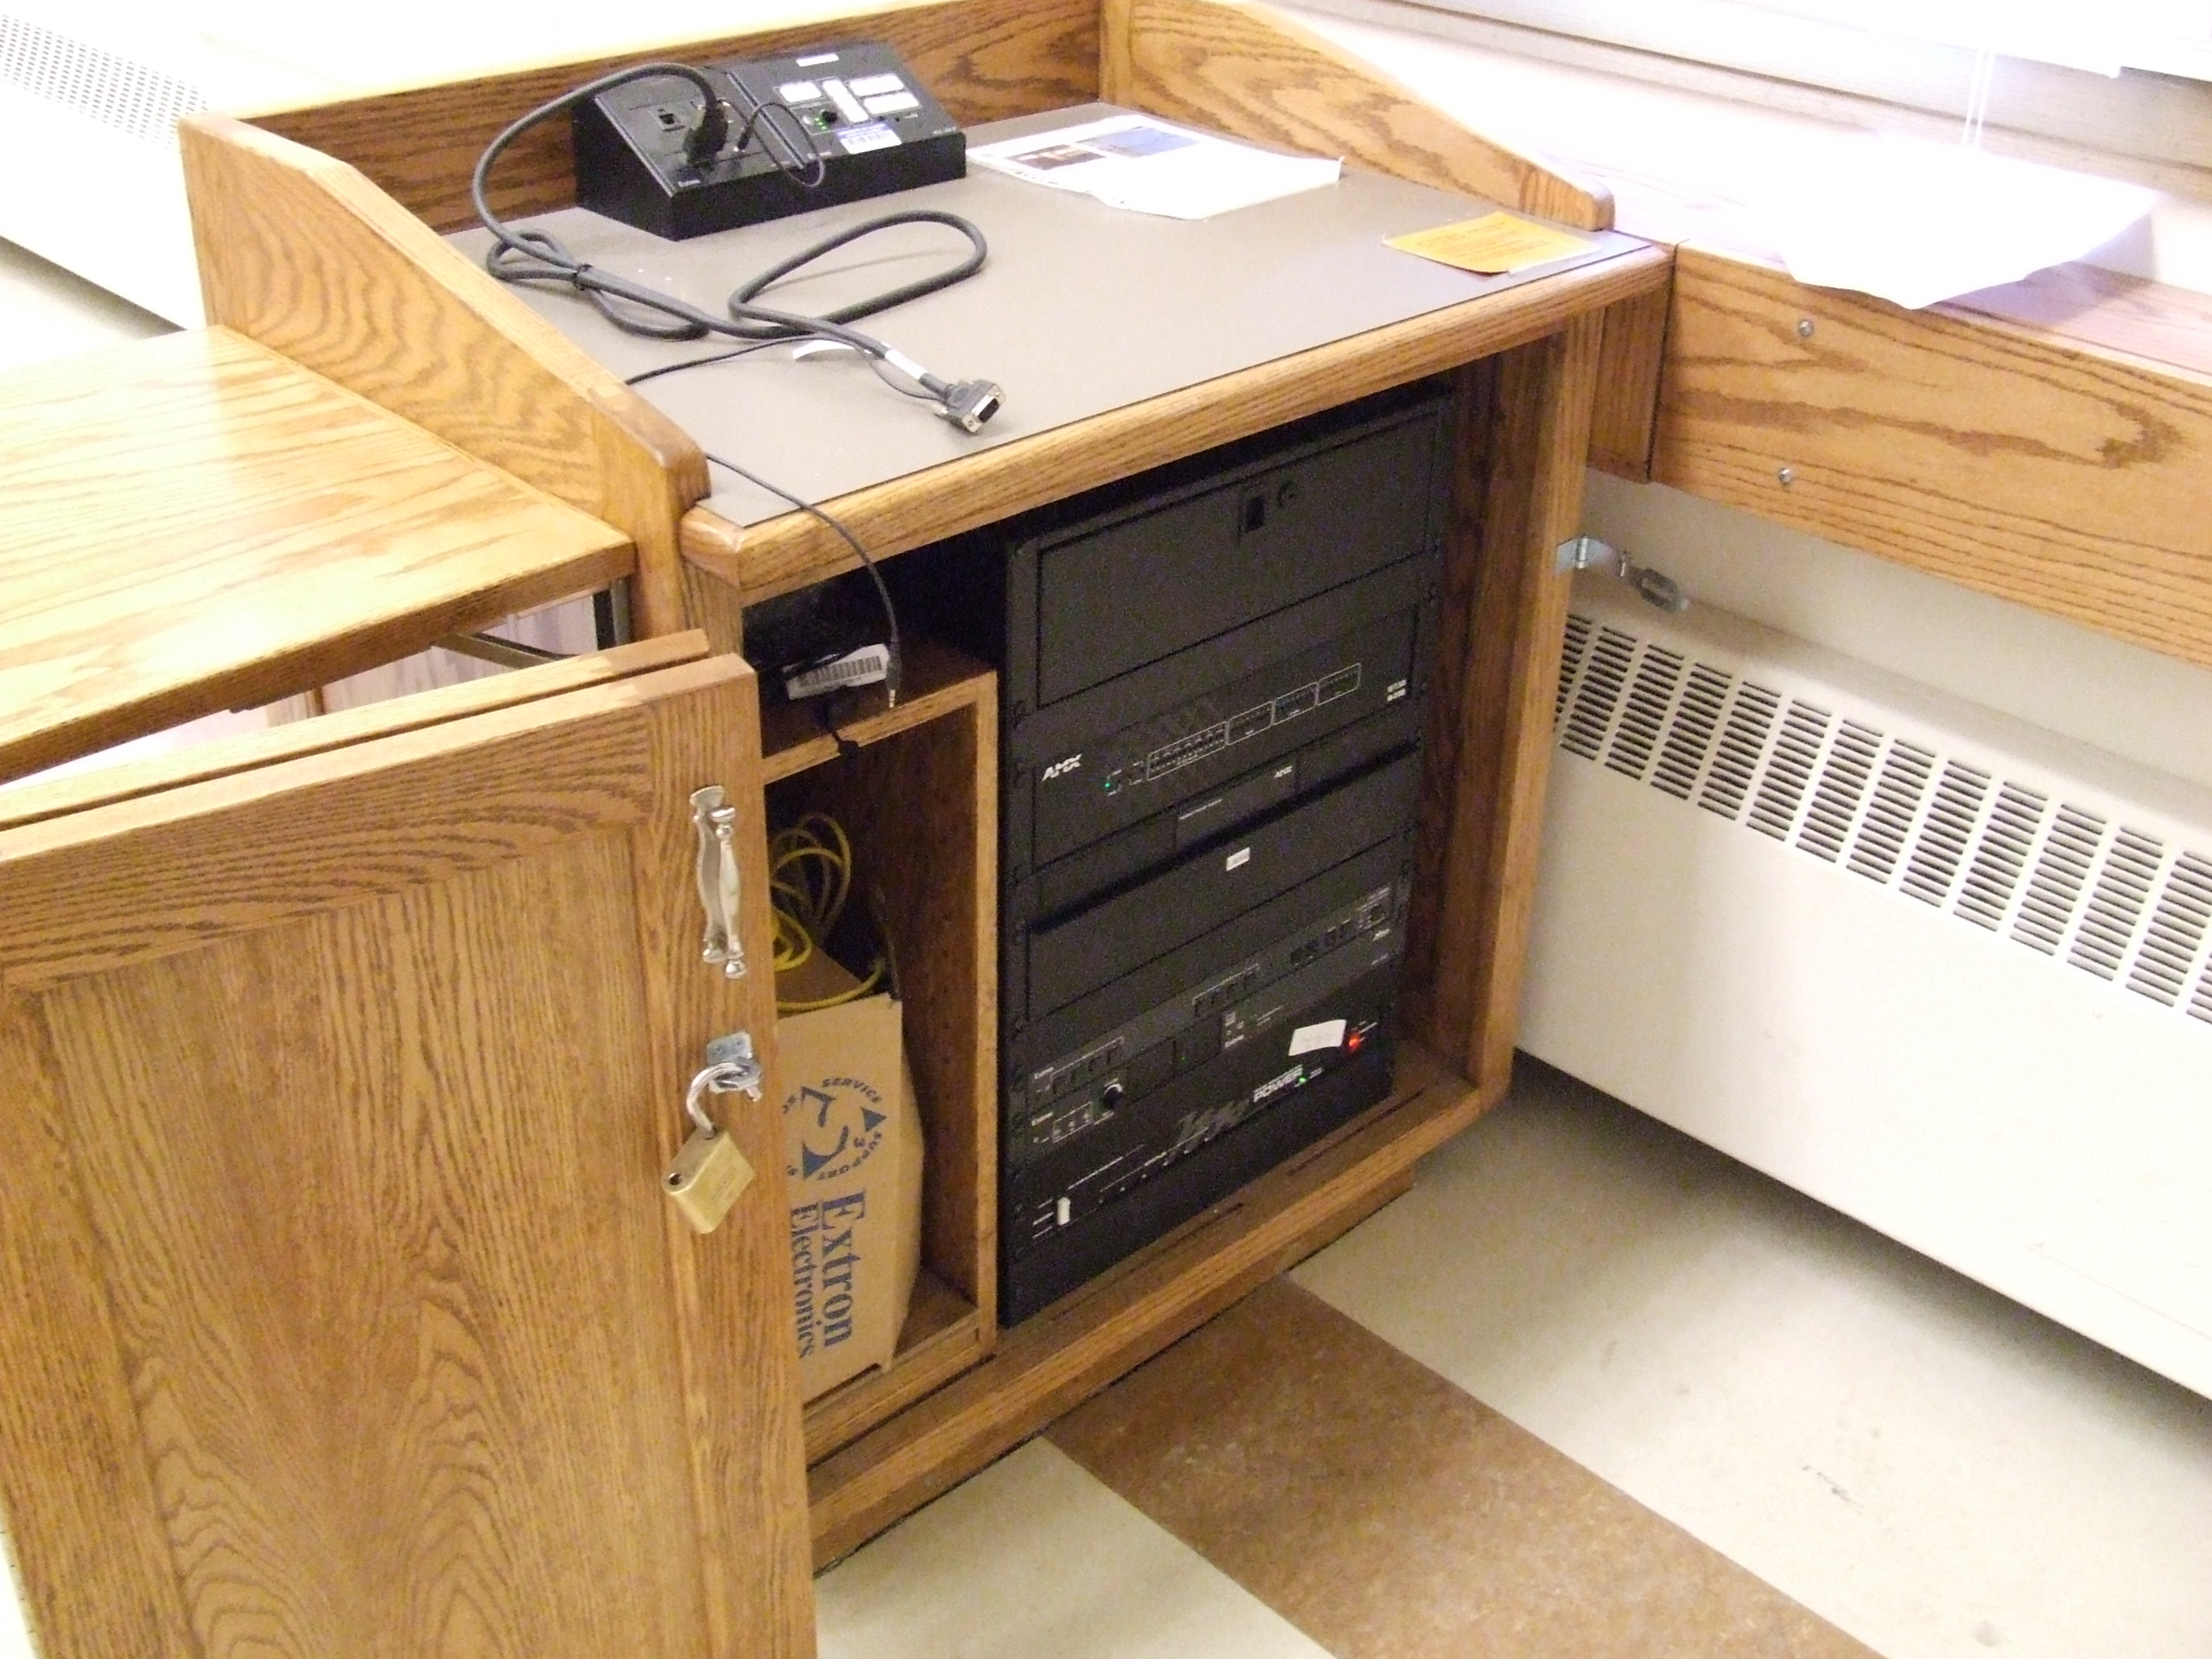 A view of the open cabinet with HDMI input, a push button controller, and audio visual rack.